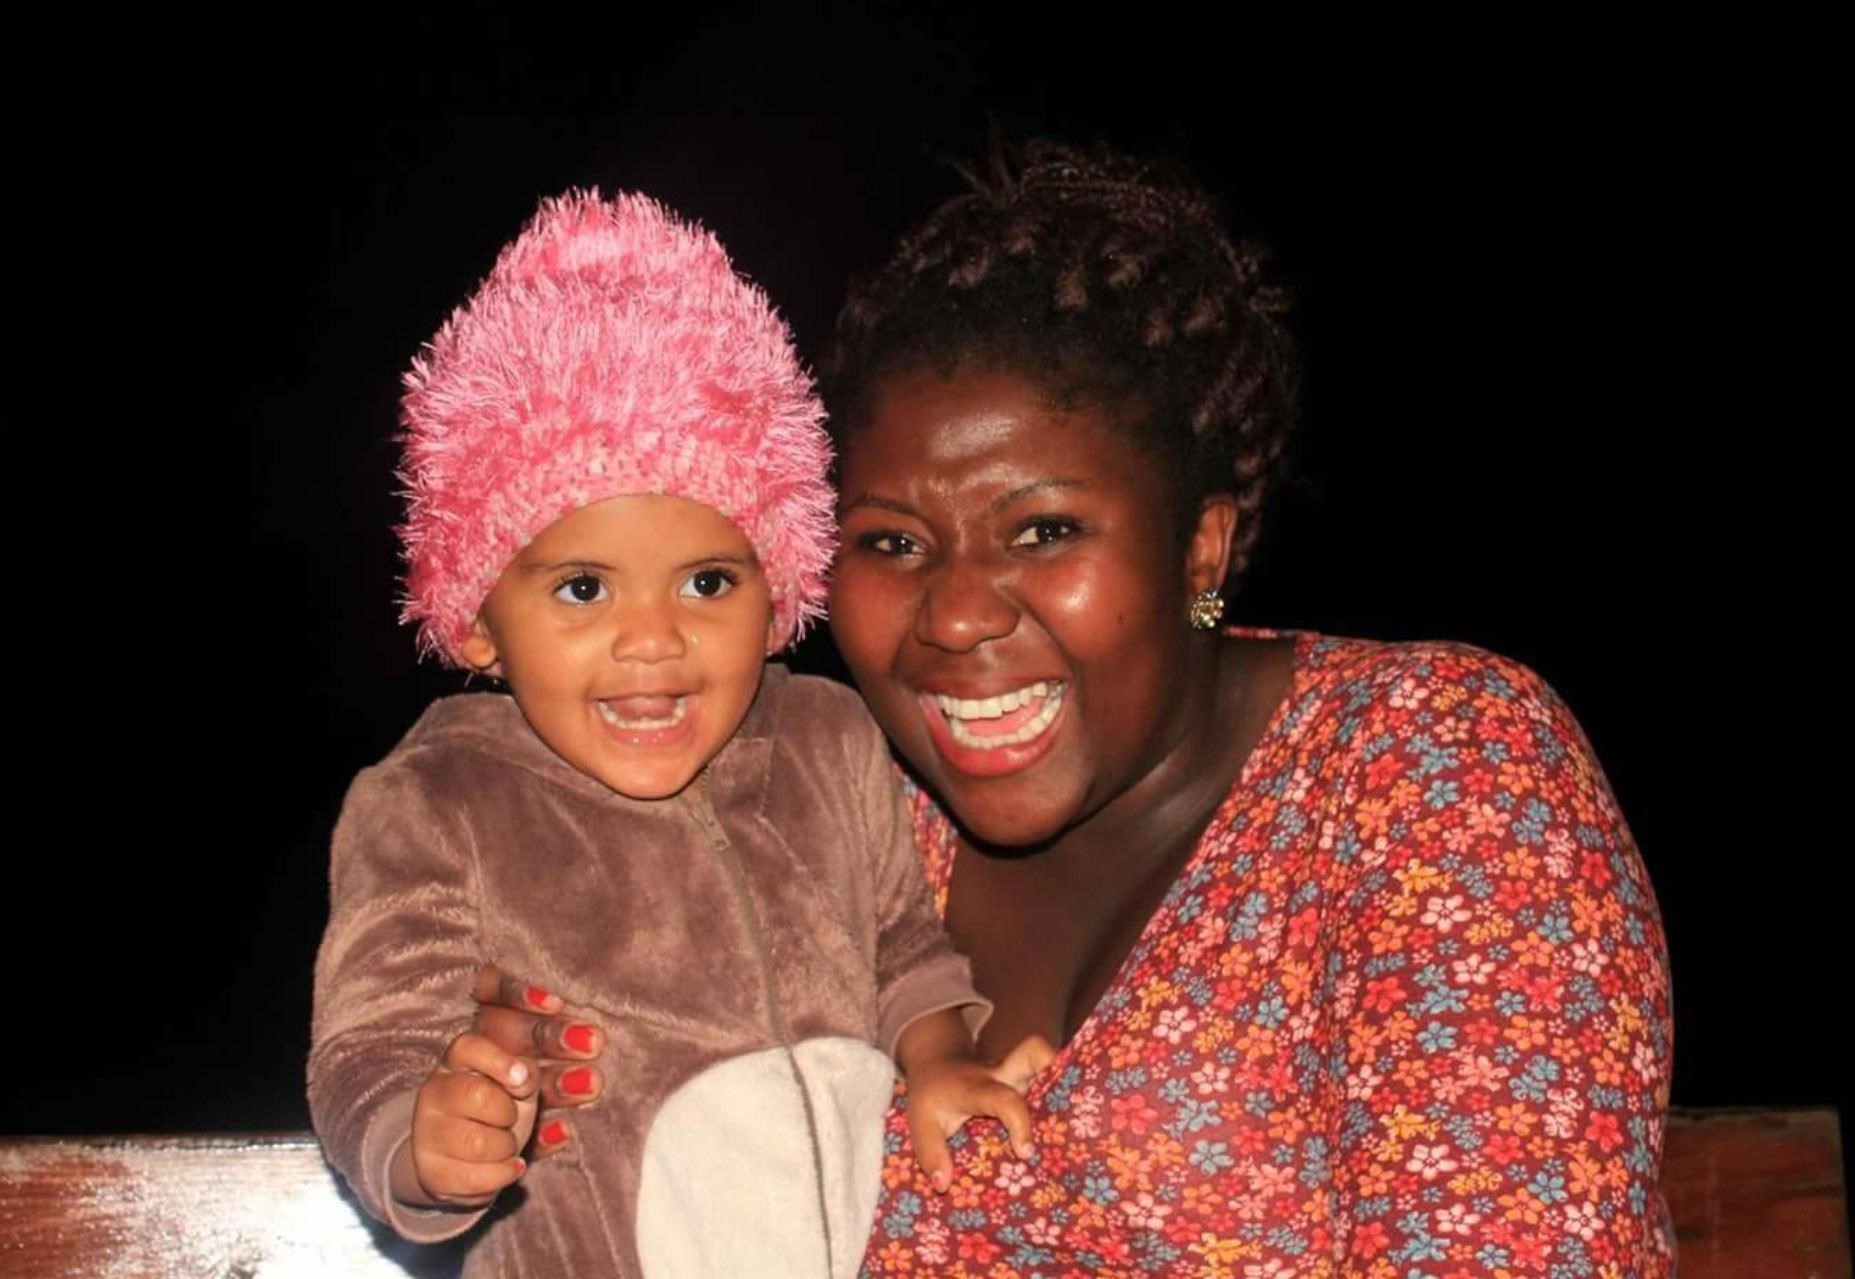 Zinhle and her little girl Naomi, who has since passed away